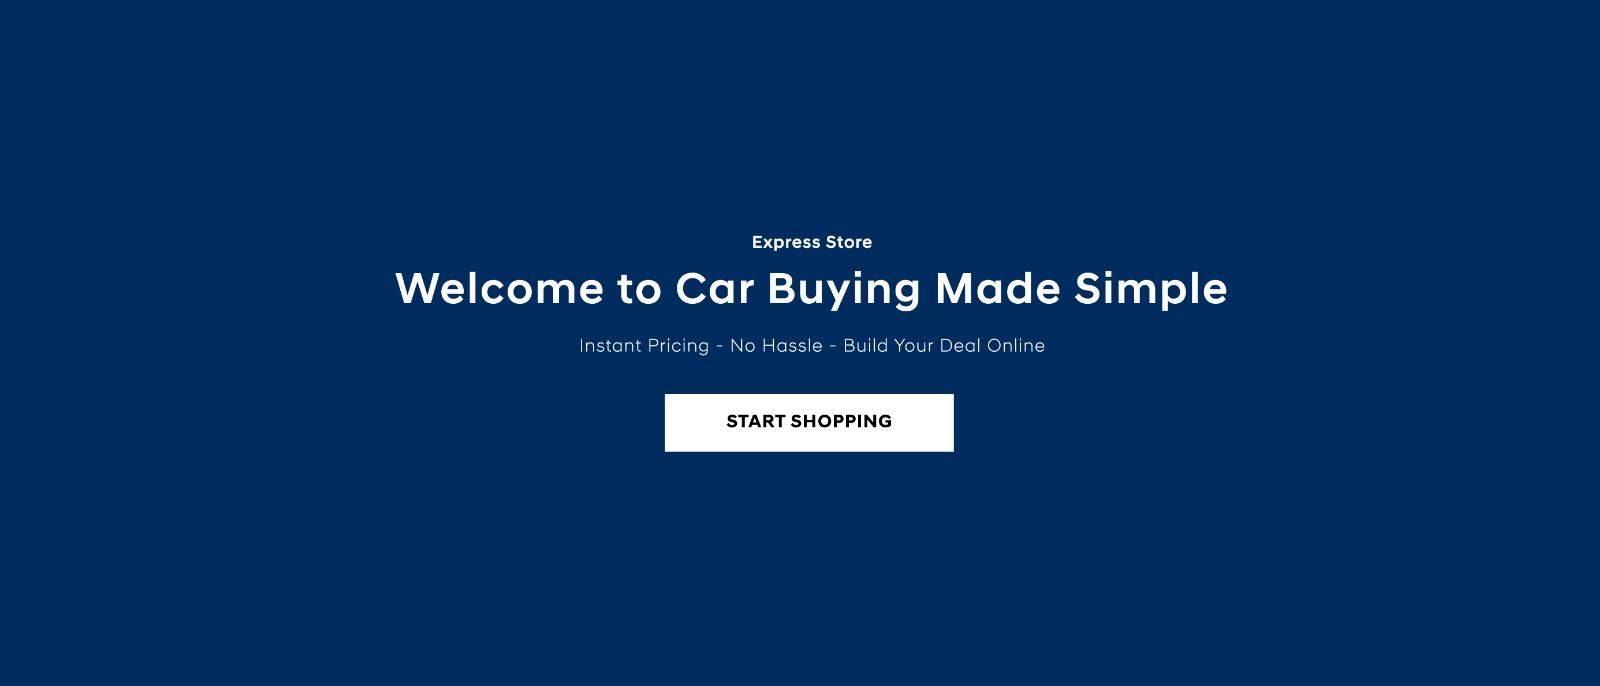 Express Store Welcome to Car Buying Made Simple